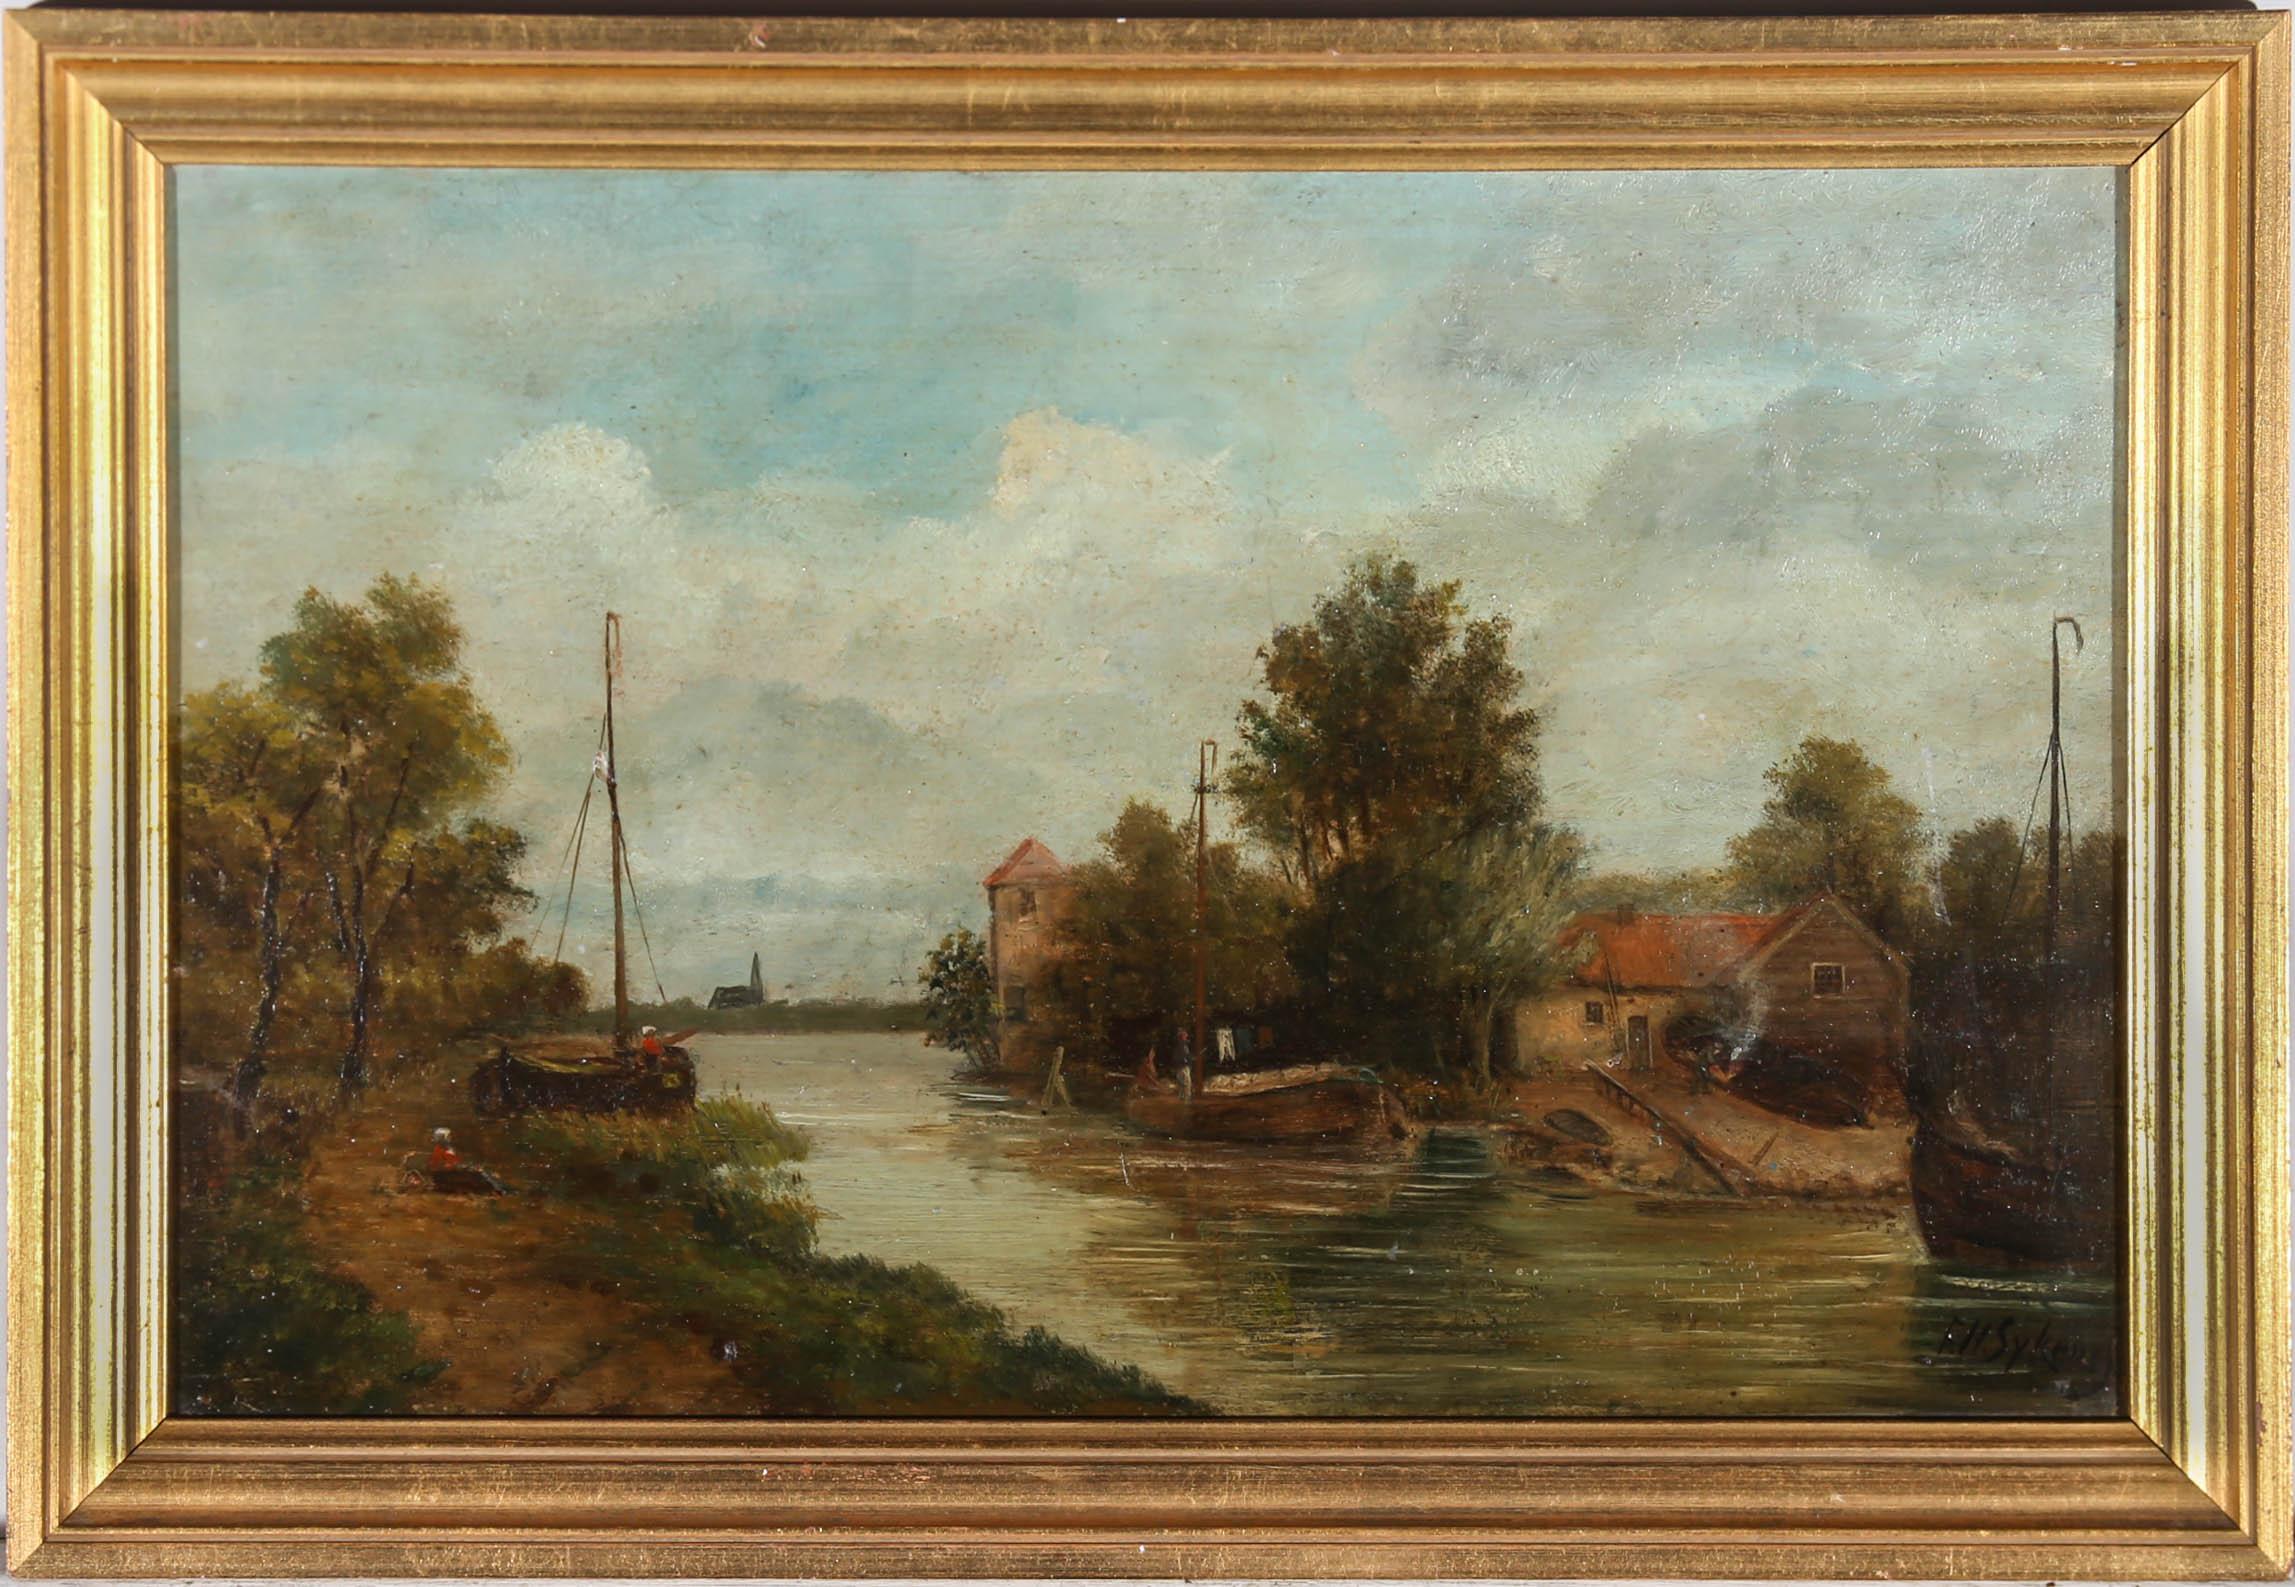 A charming riverscape, painted in oils by dutch artist Ferdinand Hendrik Sypkens (1813-1860). A gentle river sweeps through the centre of the composition, with moored boats manned on either side. To the right a boathouse sits, nestled amongst trees,